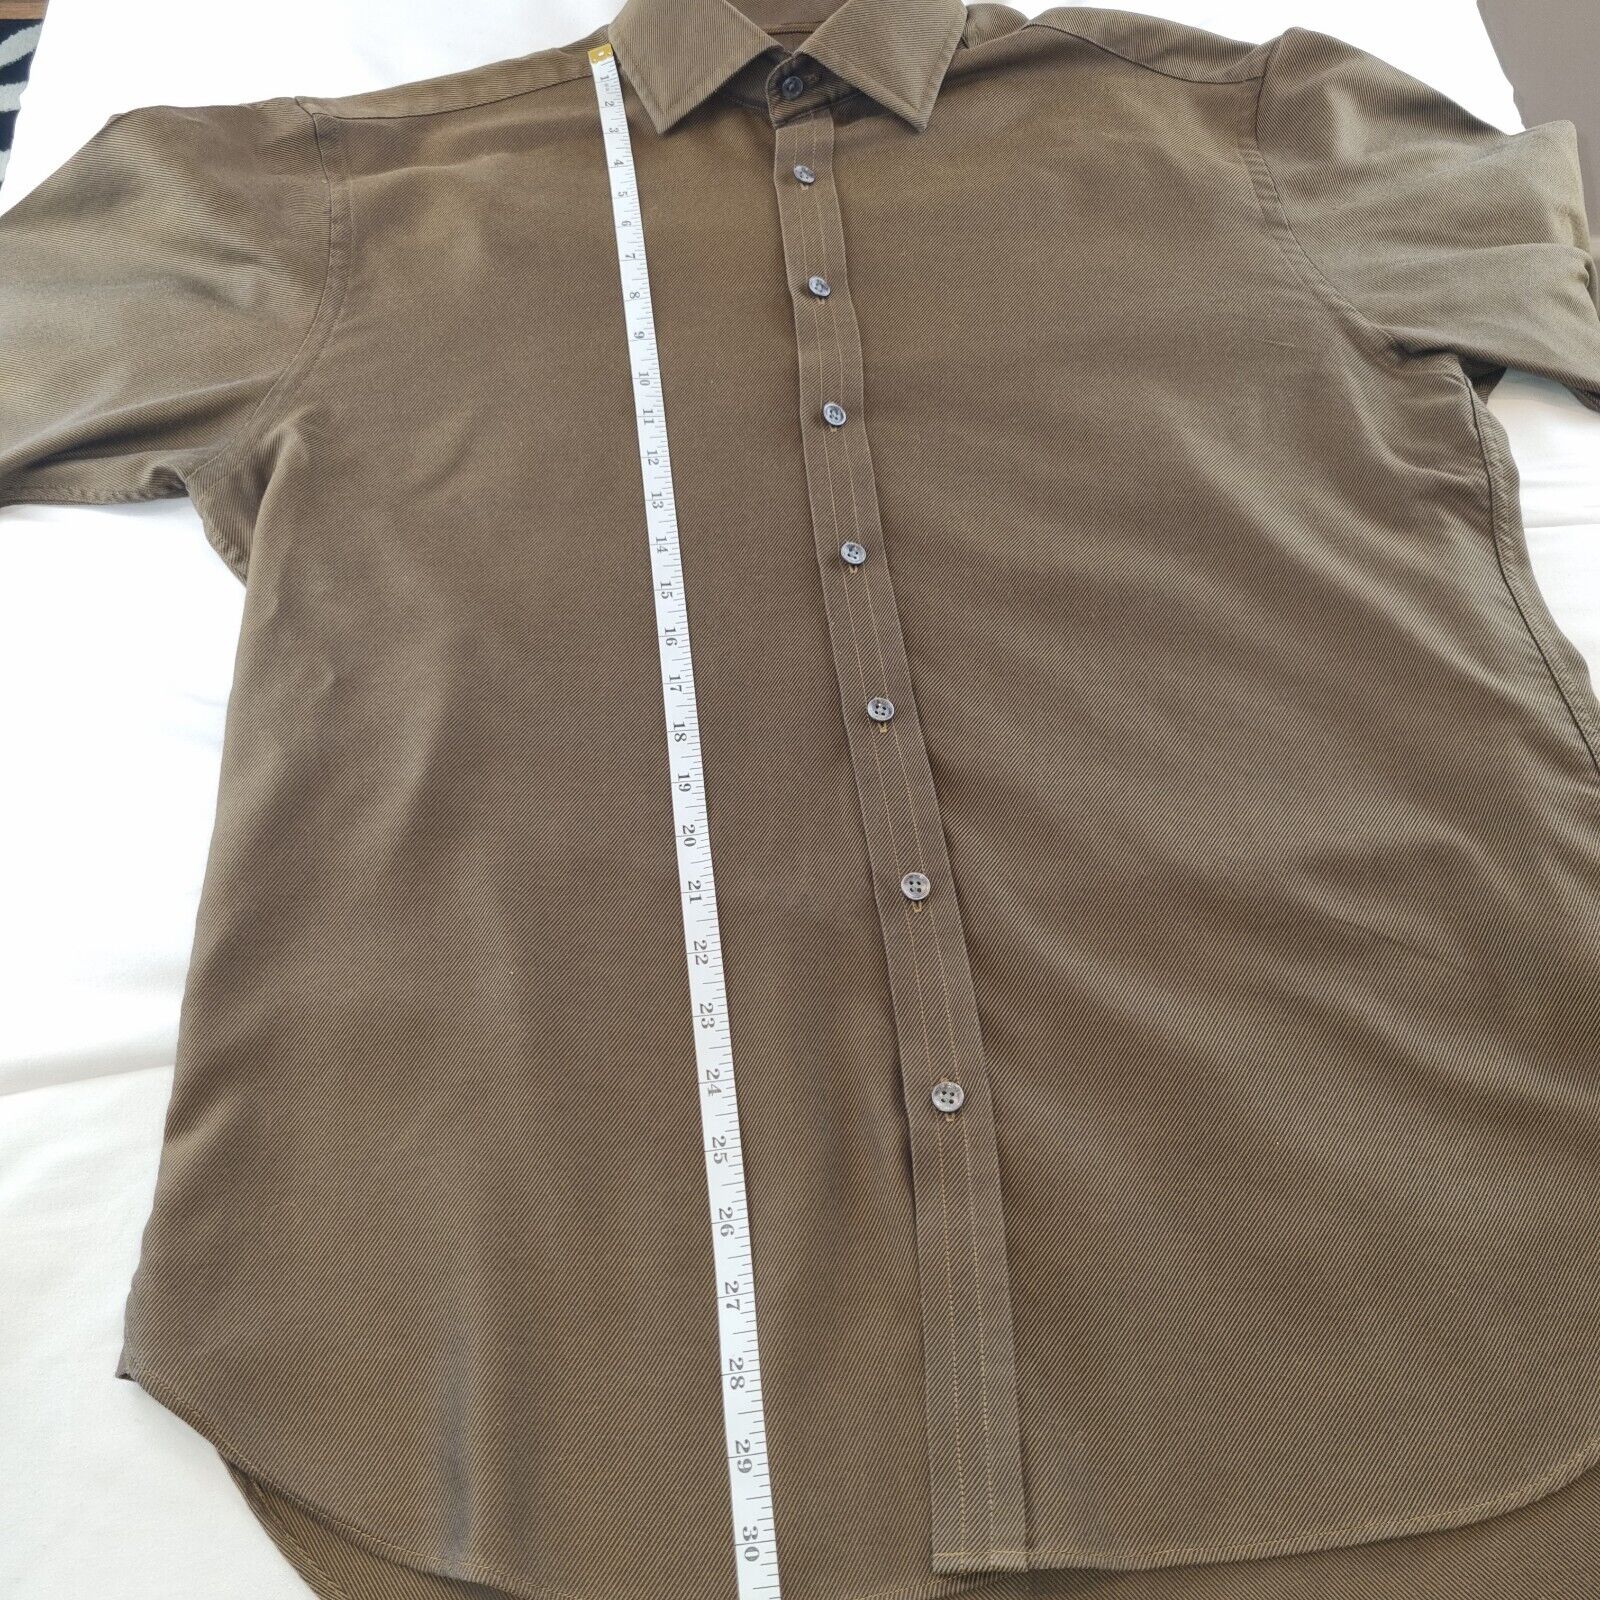 Mens Ted Baker Endurance Brown Shirt Button Up Smart Work Casual Size 17.5 - Bonnie Lassio